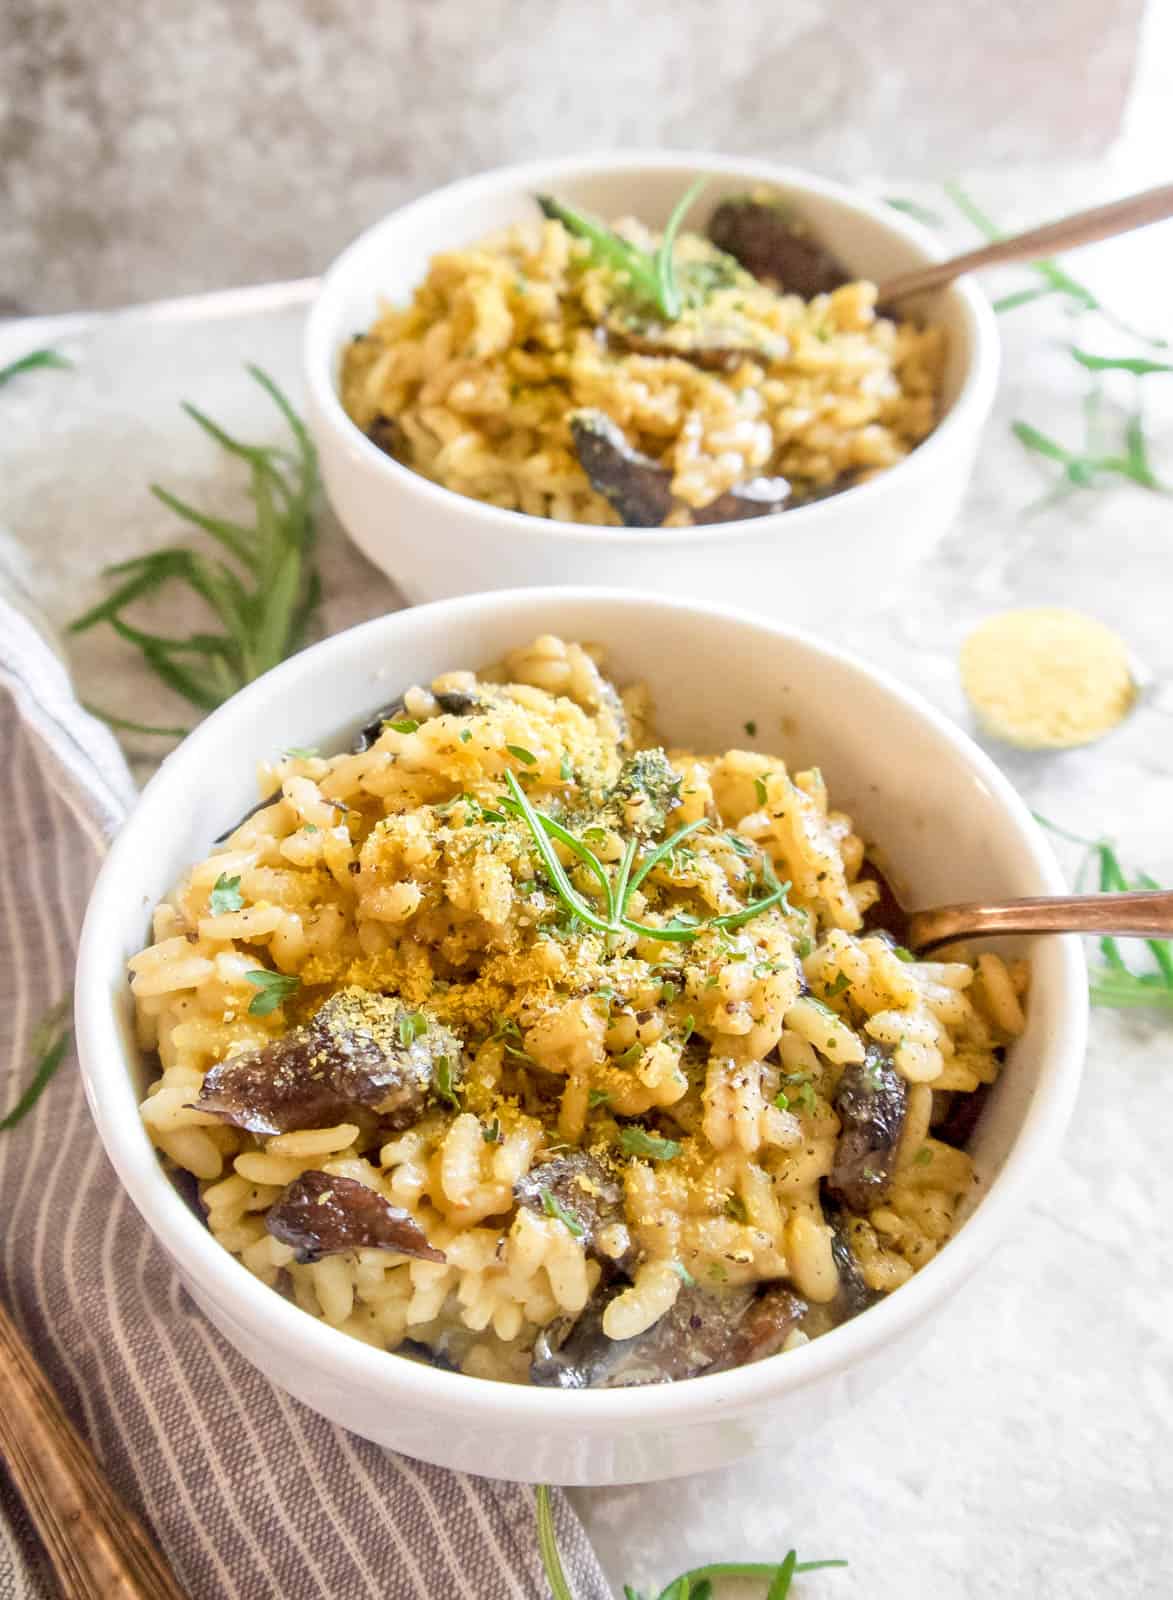 Risotto with nutritional yeast on top in a bowl.